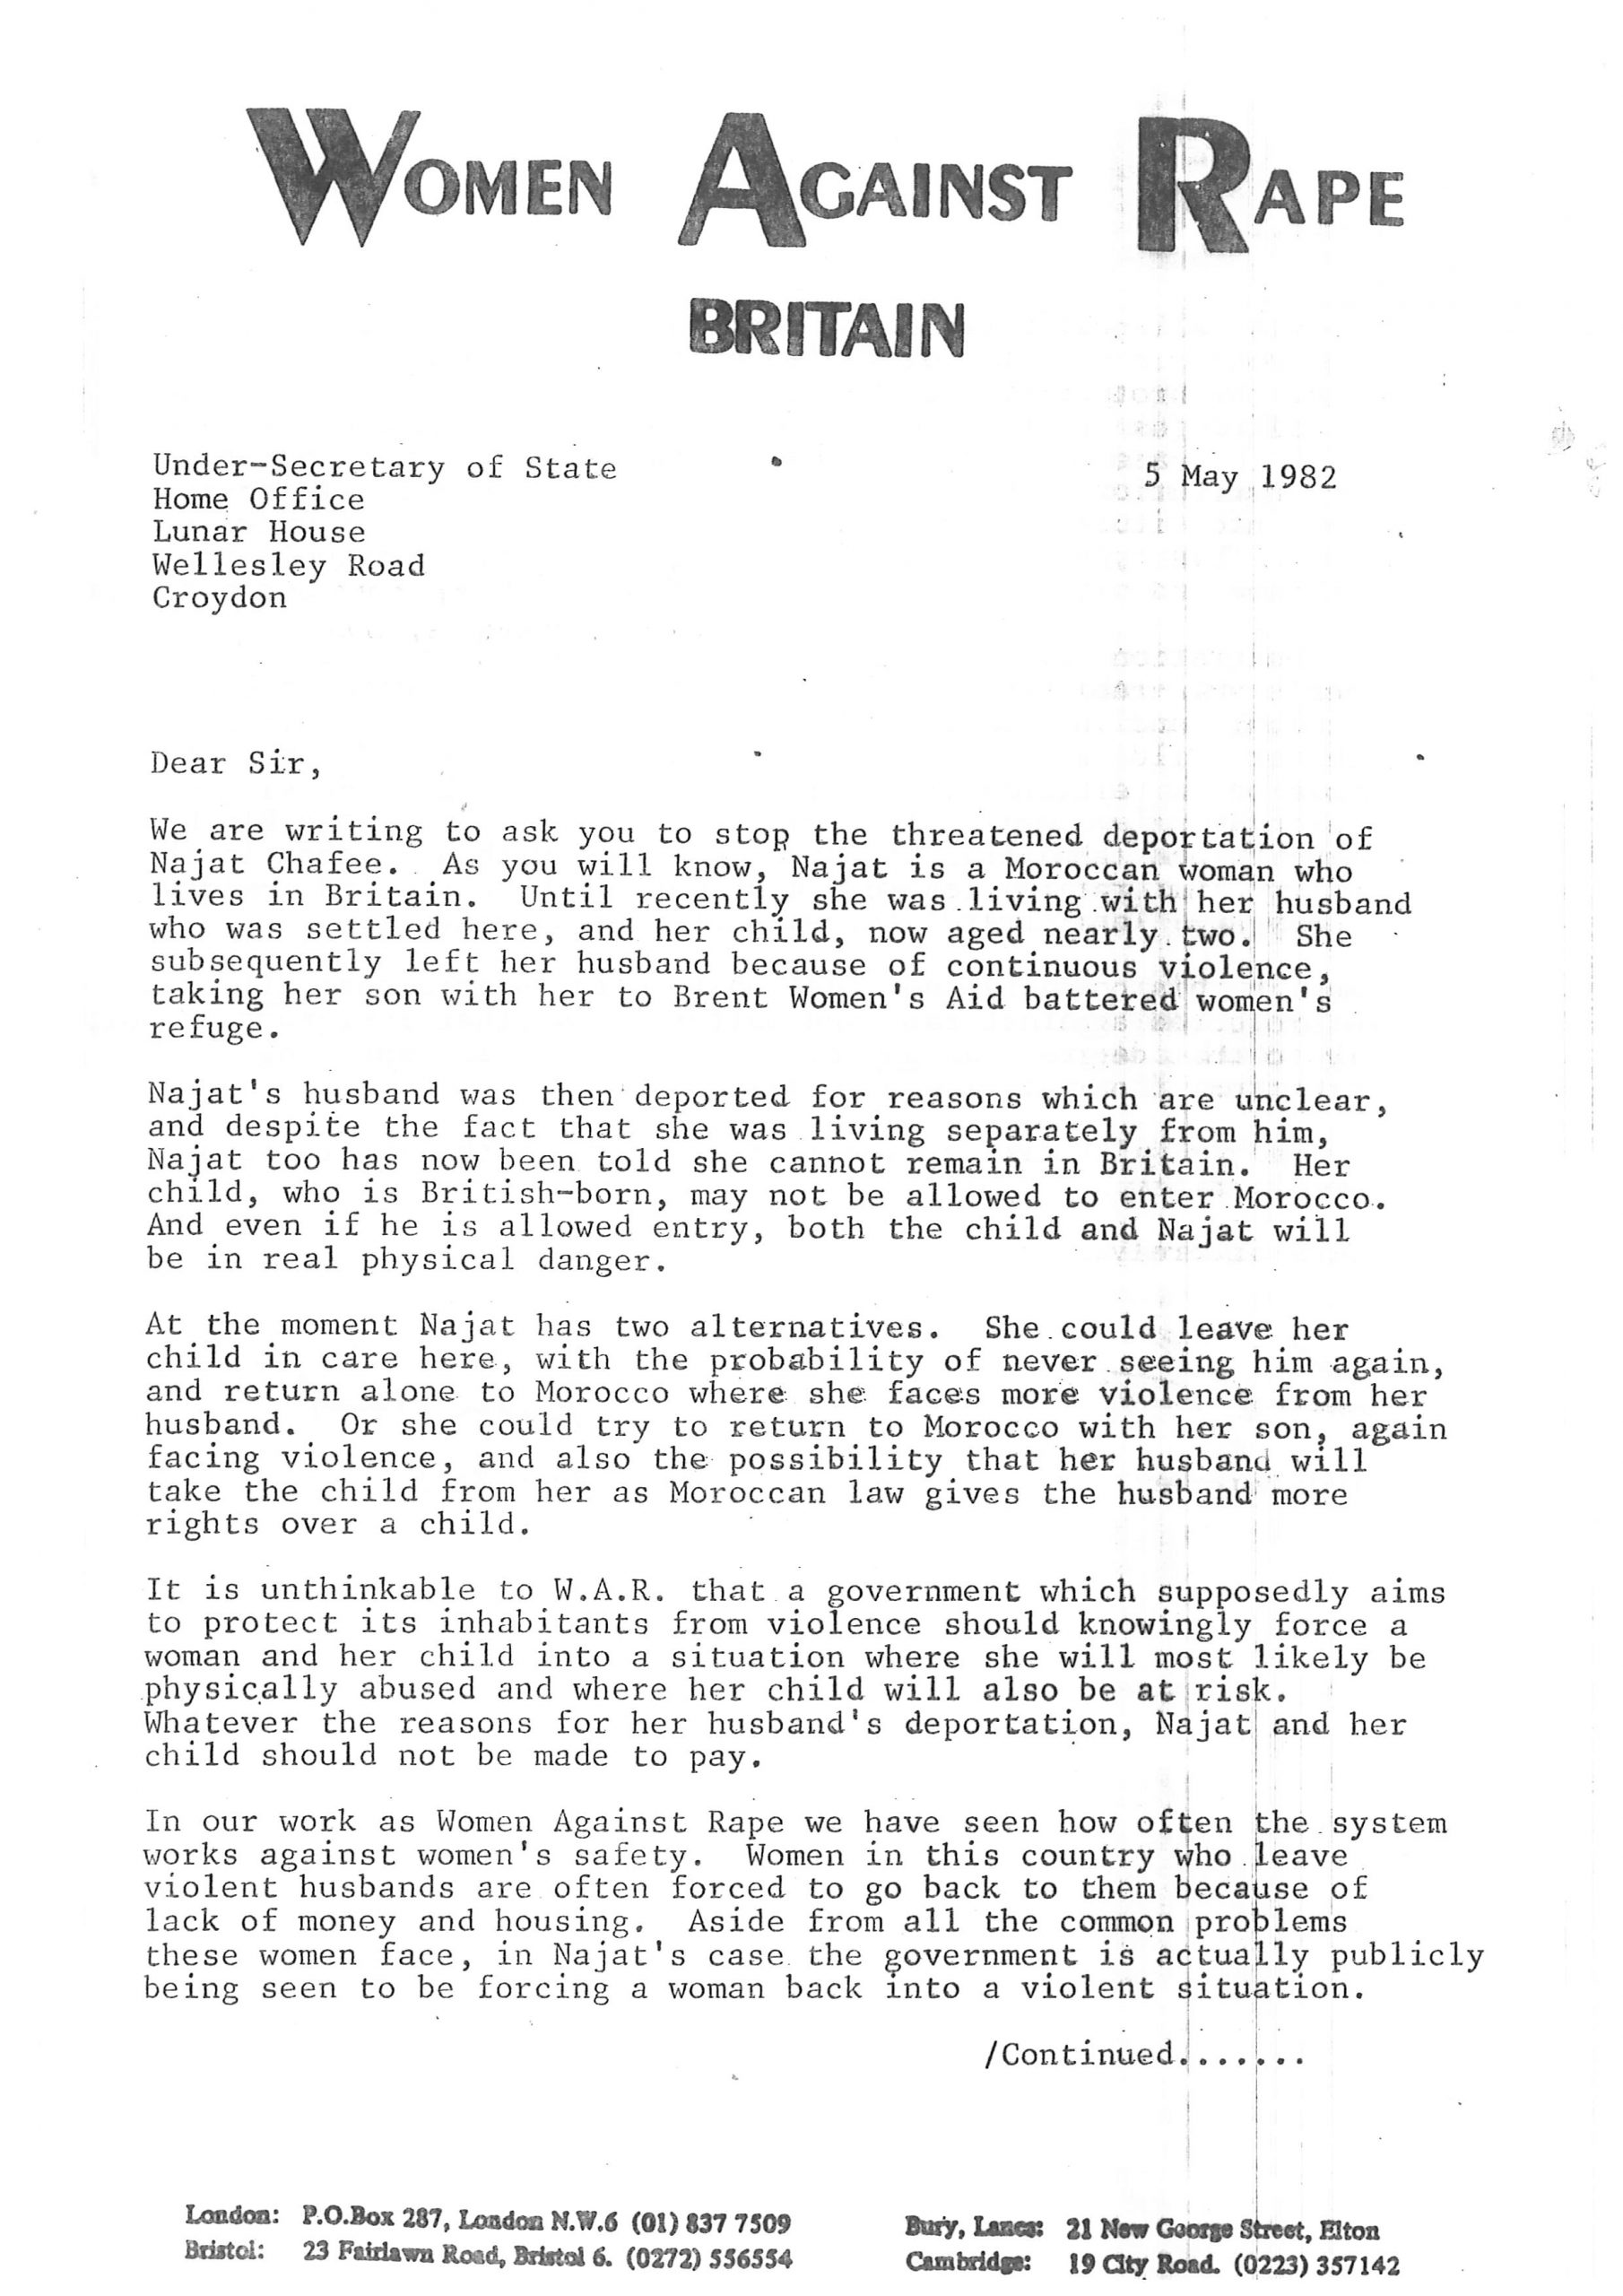 1982_letter to under secutary_05242023_123745